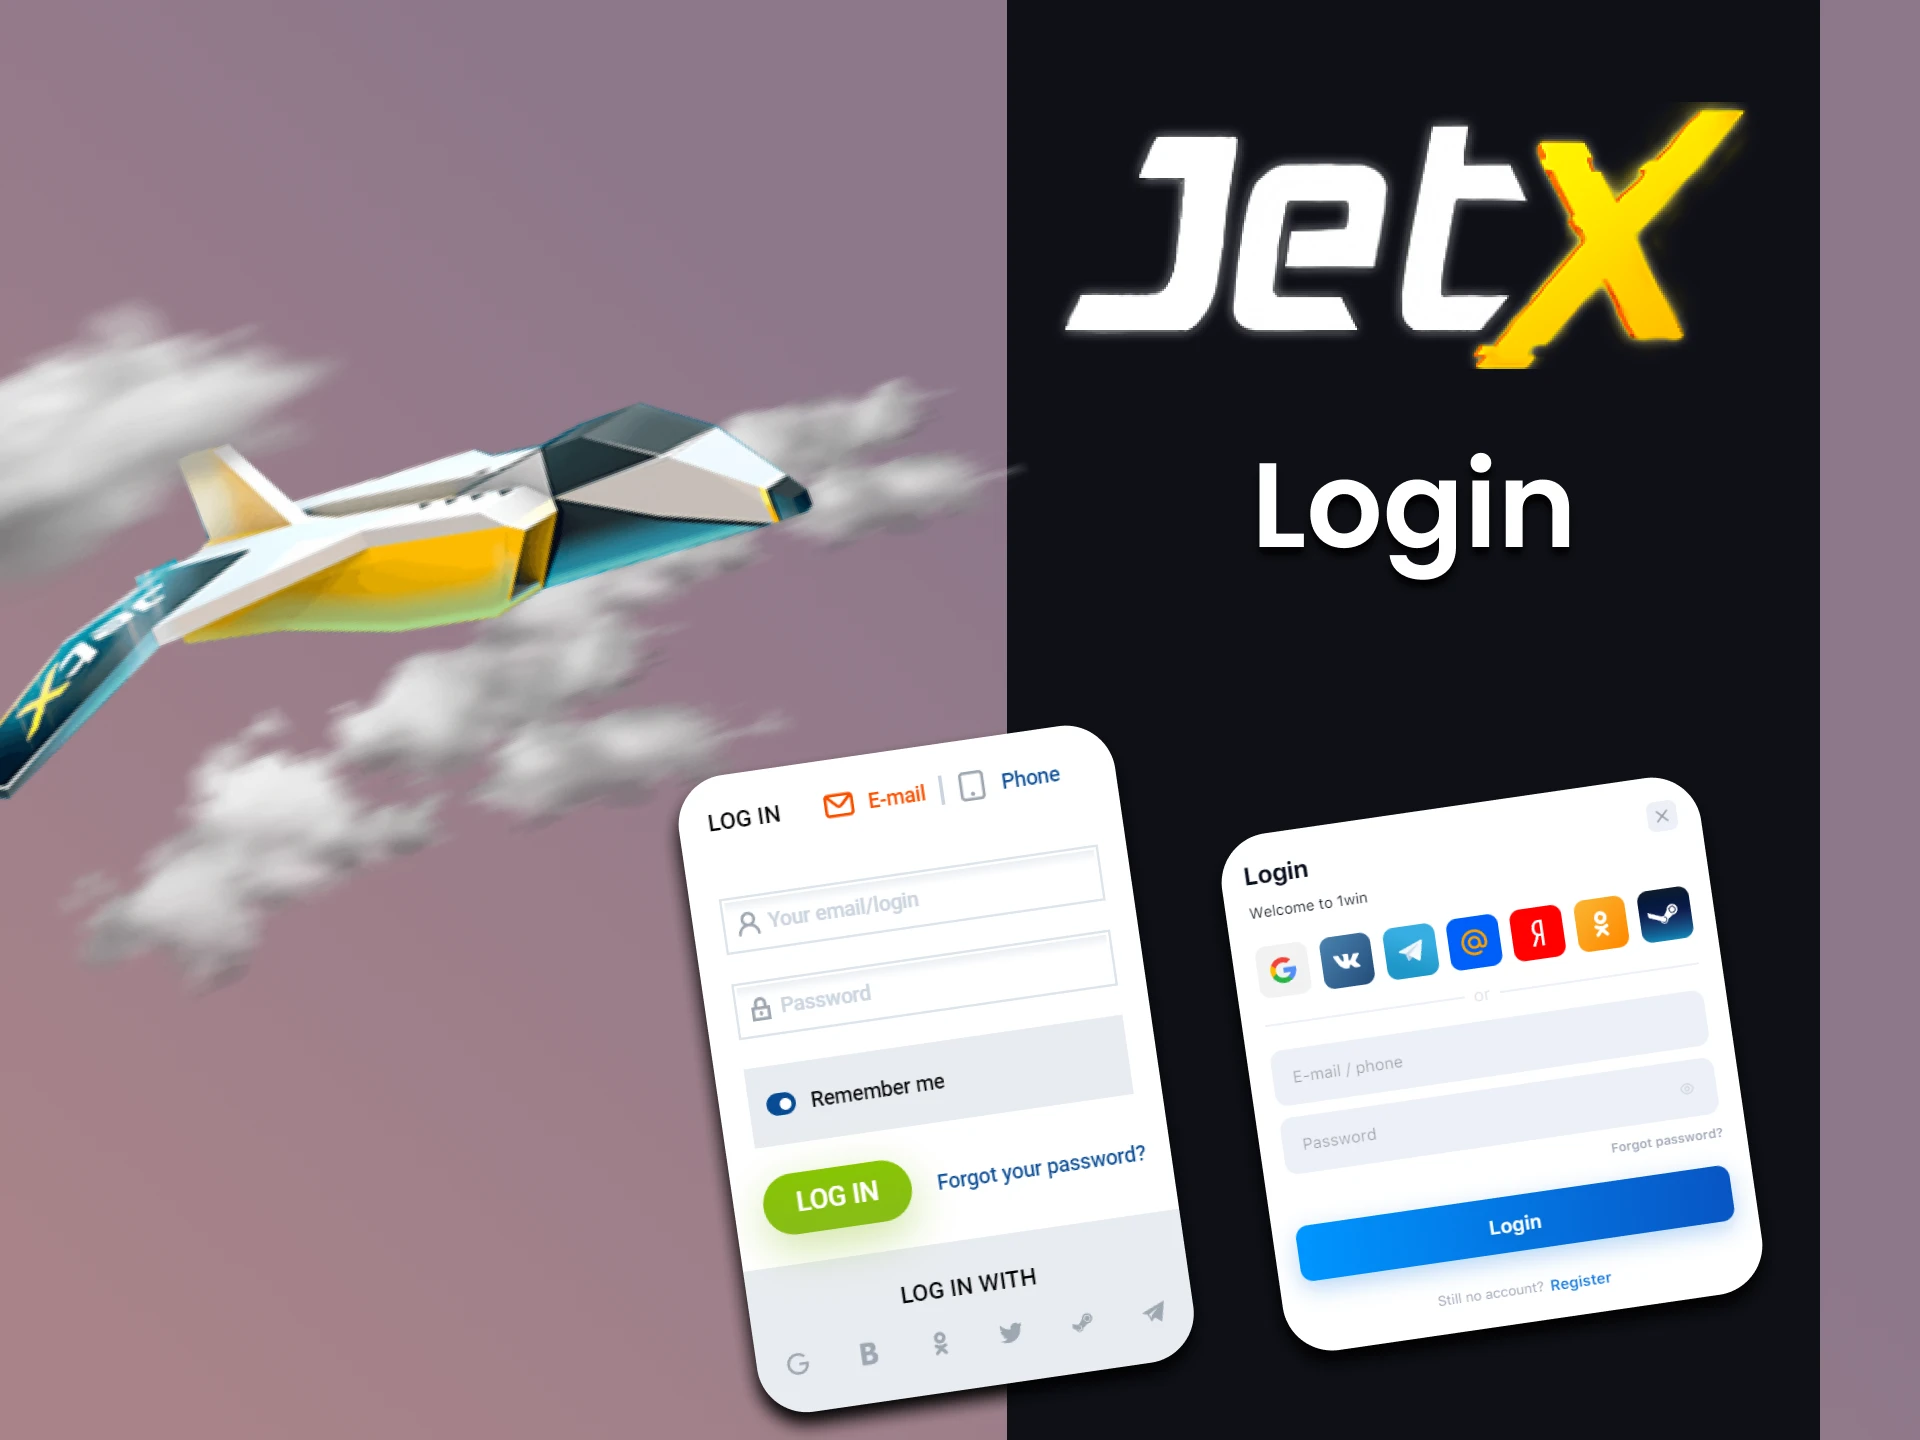 Sign in to your personal account and start playing JetX.